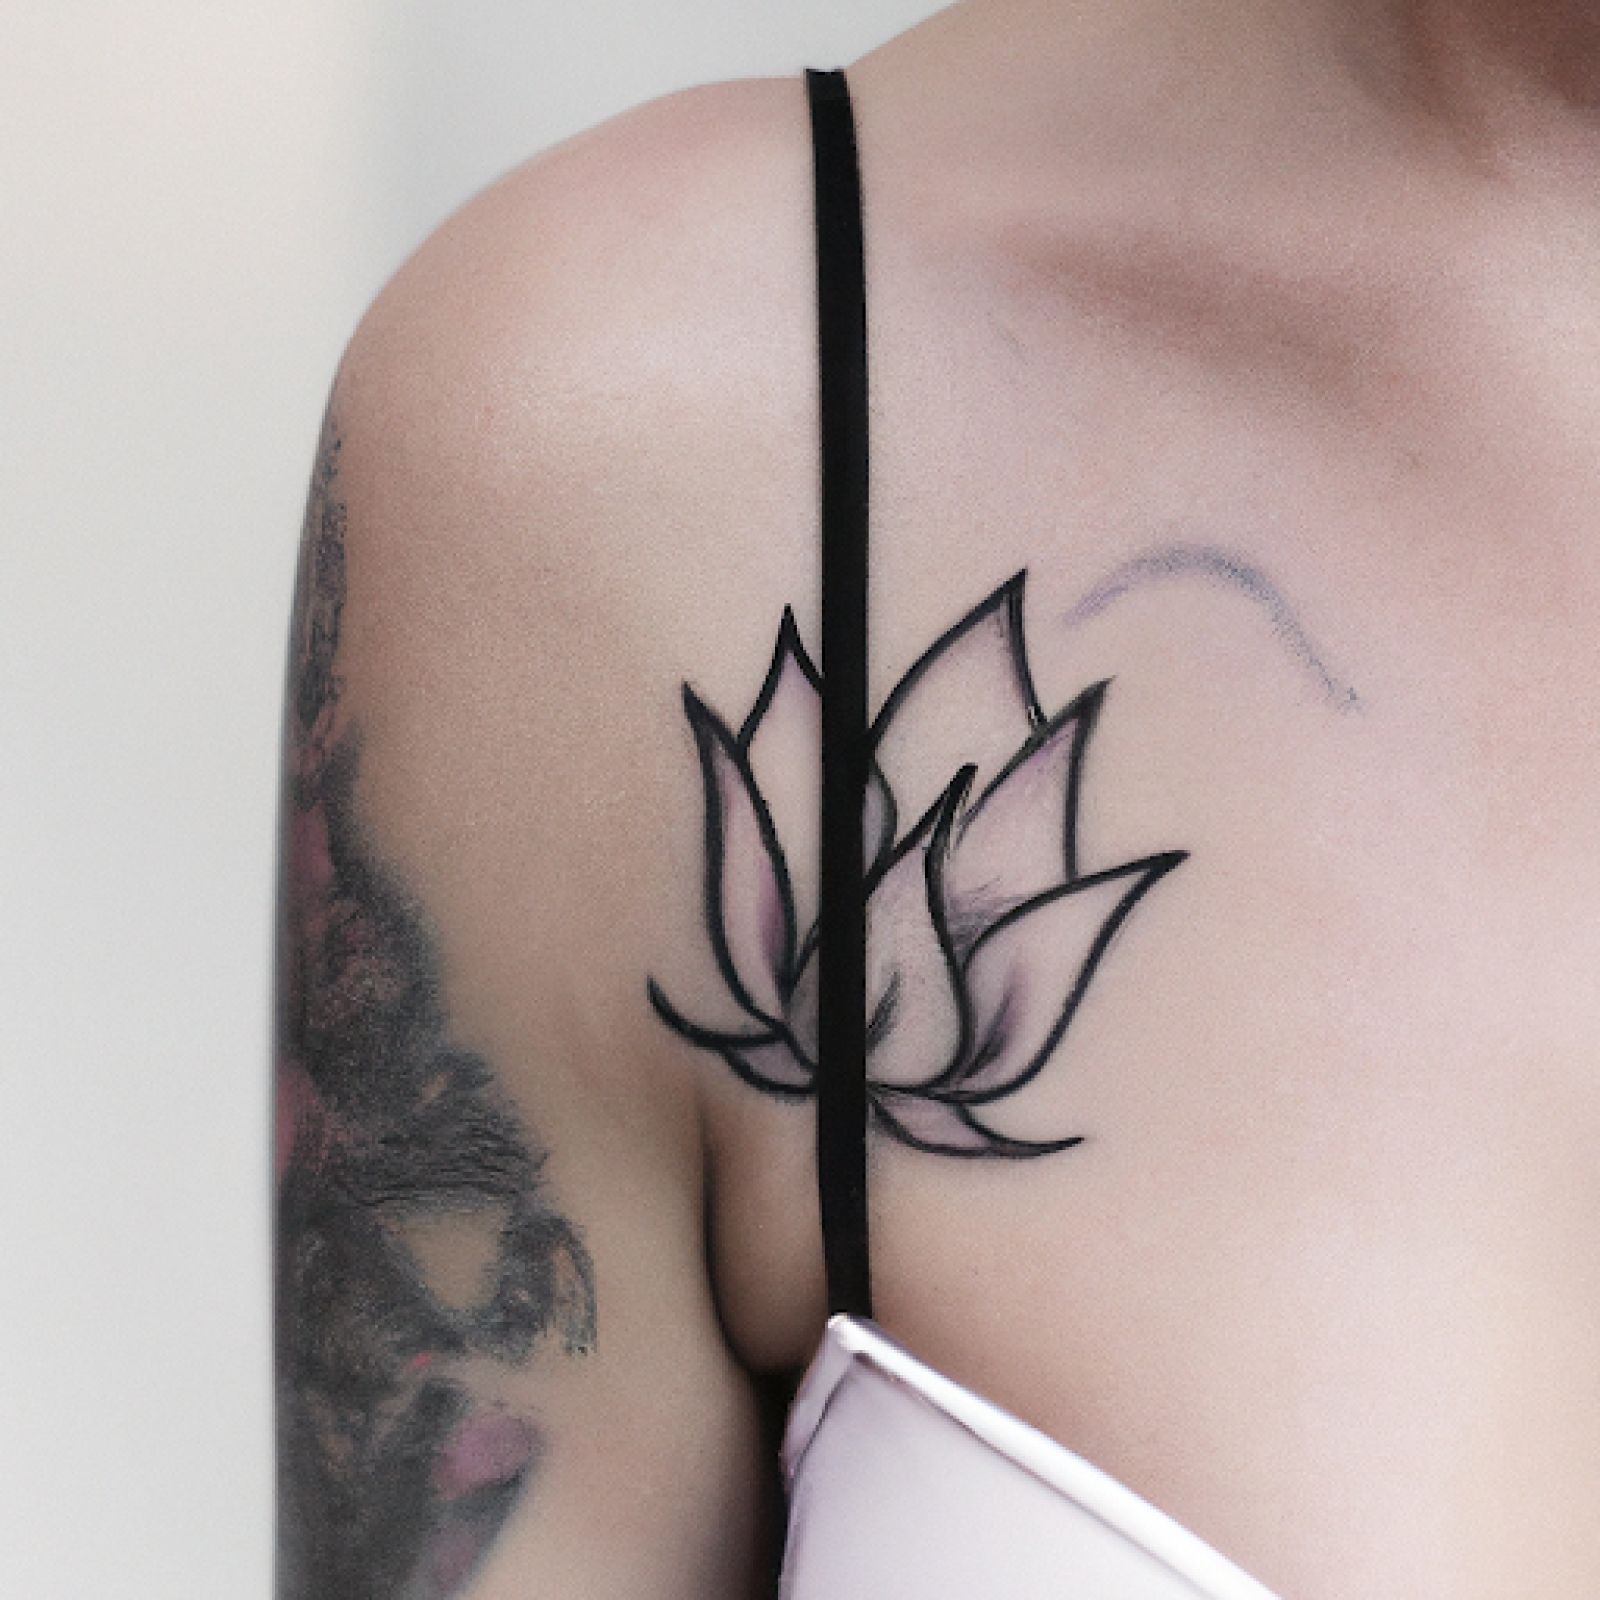 Lotus tattoo on chest for women